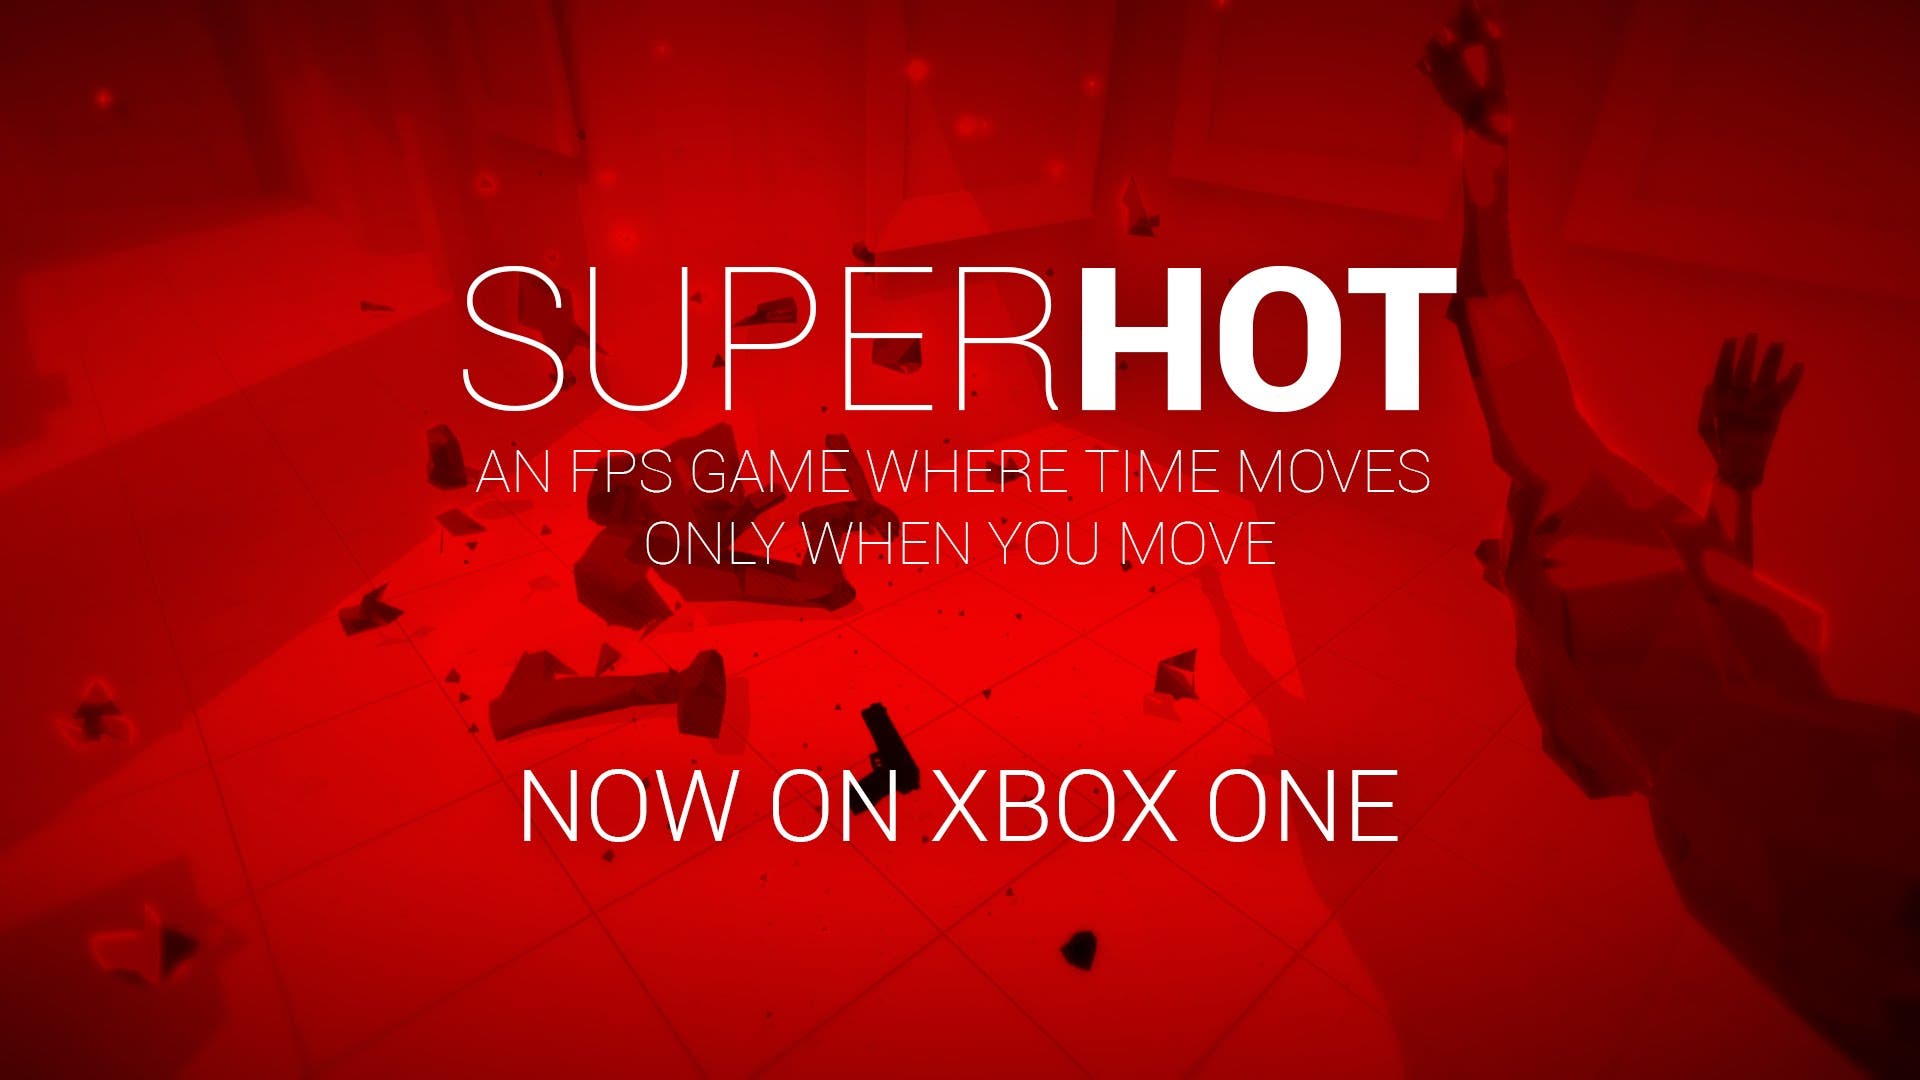 superhot is available on xbox on